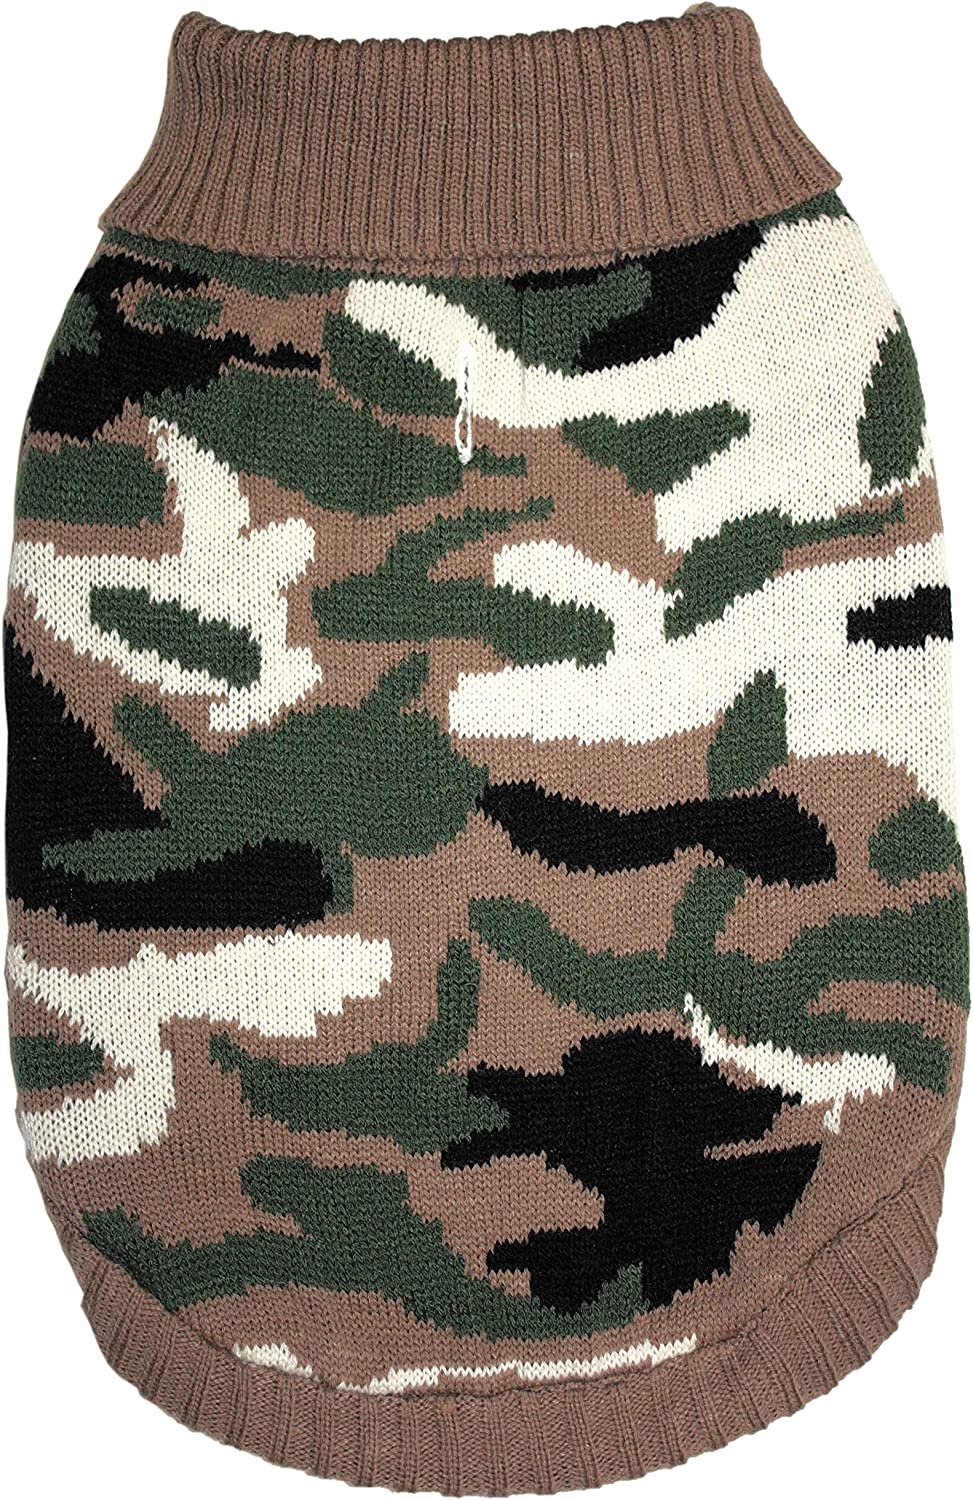 Camouflage Sweater for Dogs or Cats